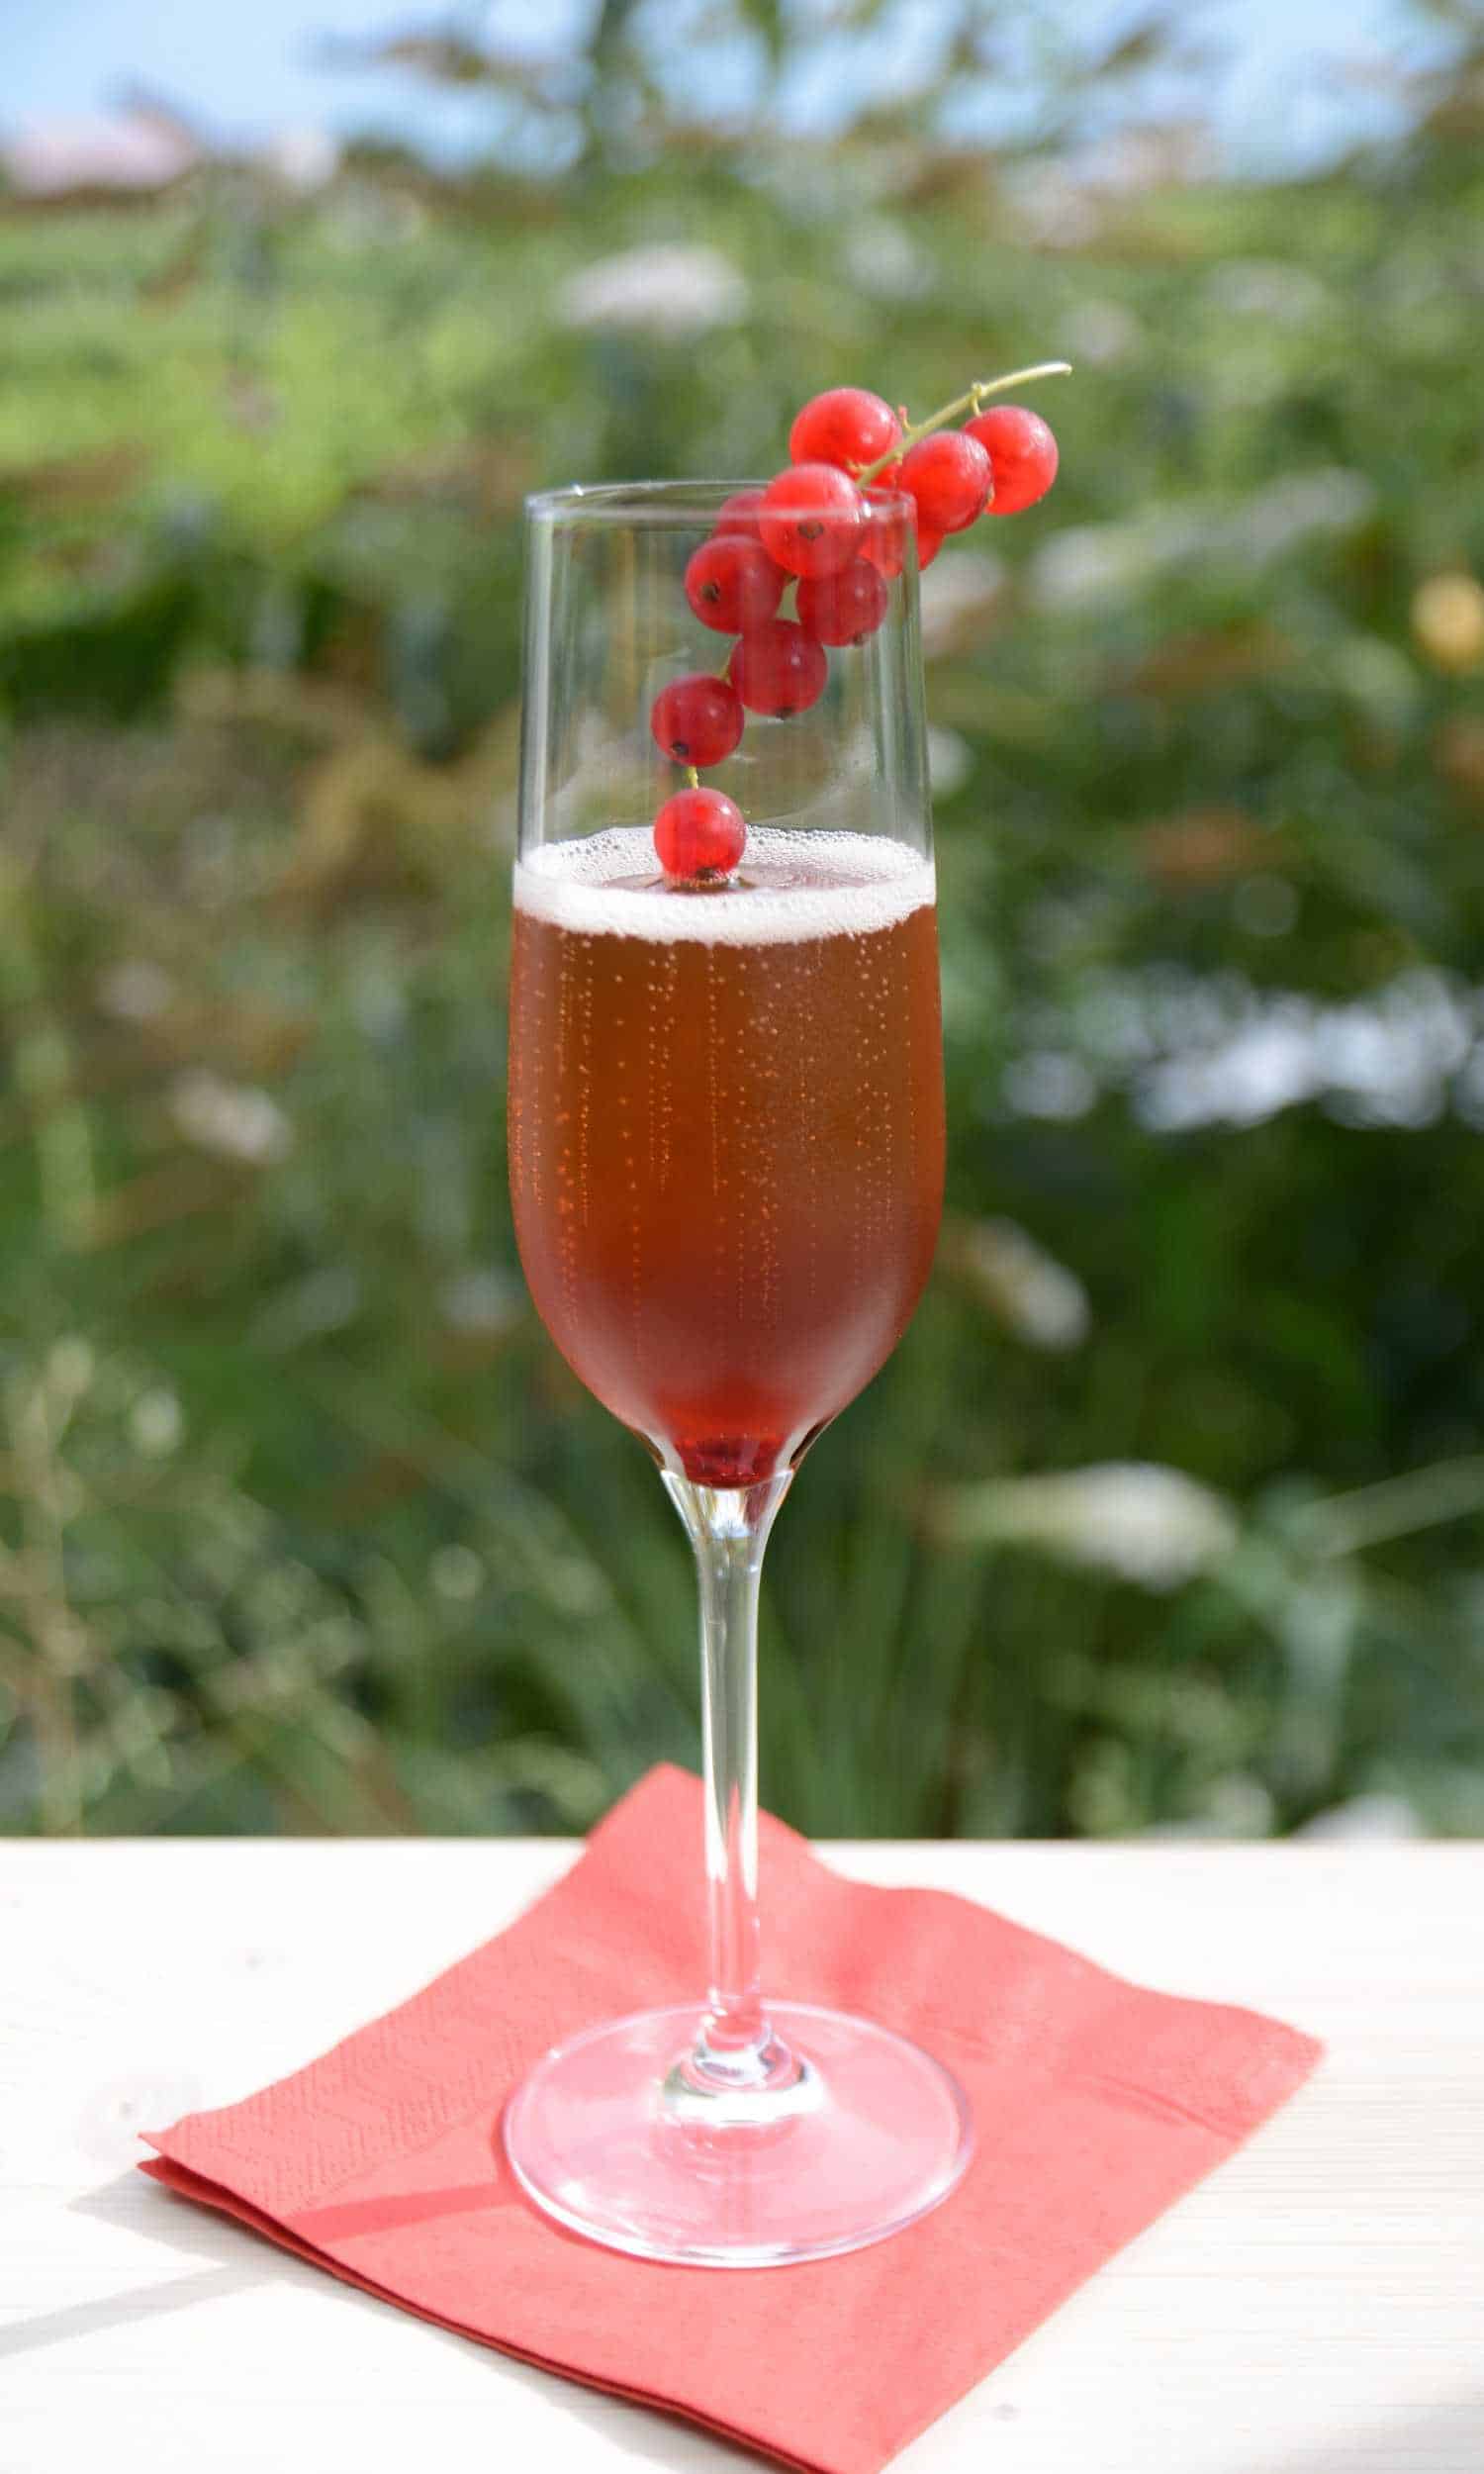 Kir Cocktail in a champagne flute outside on a red napkin.